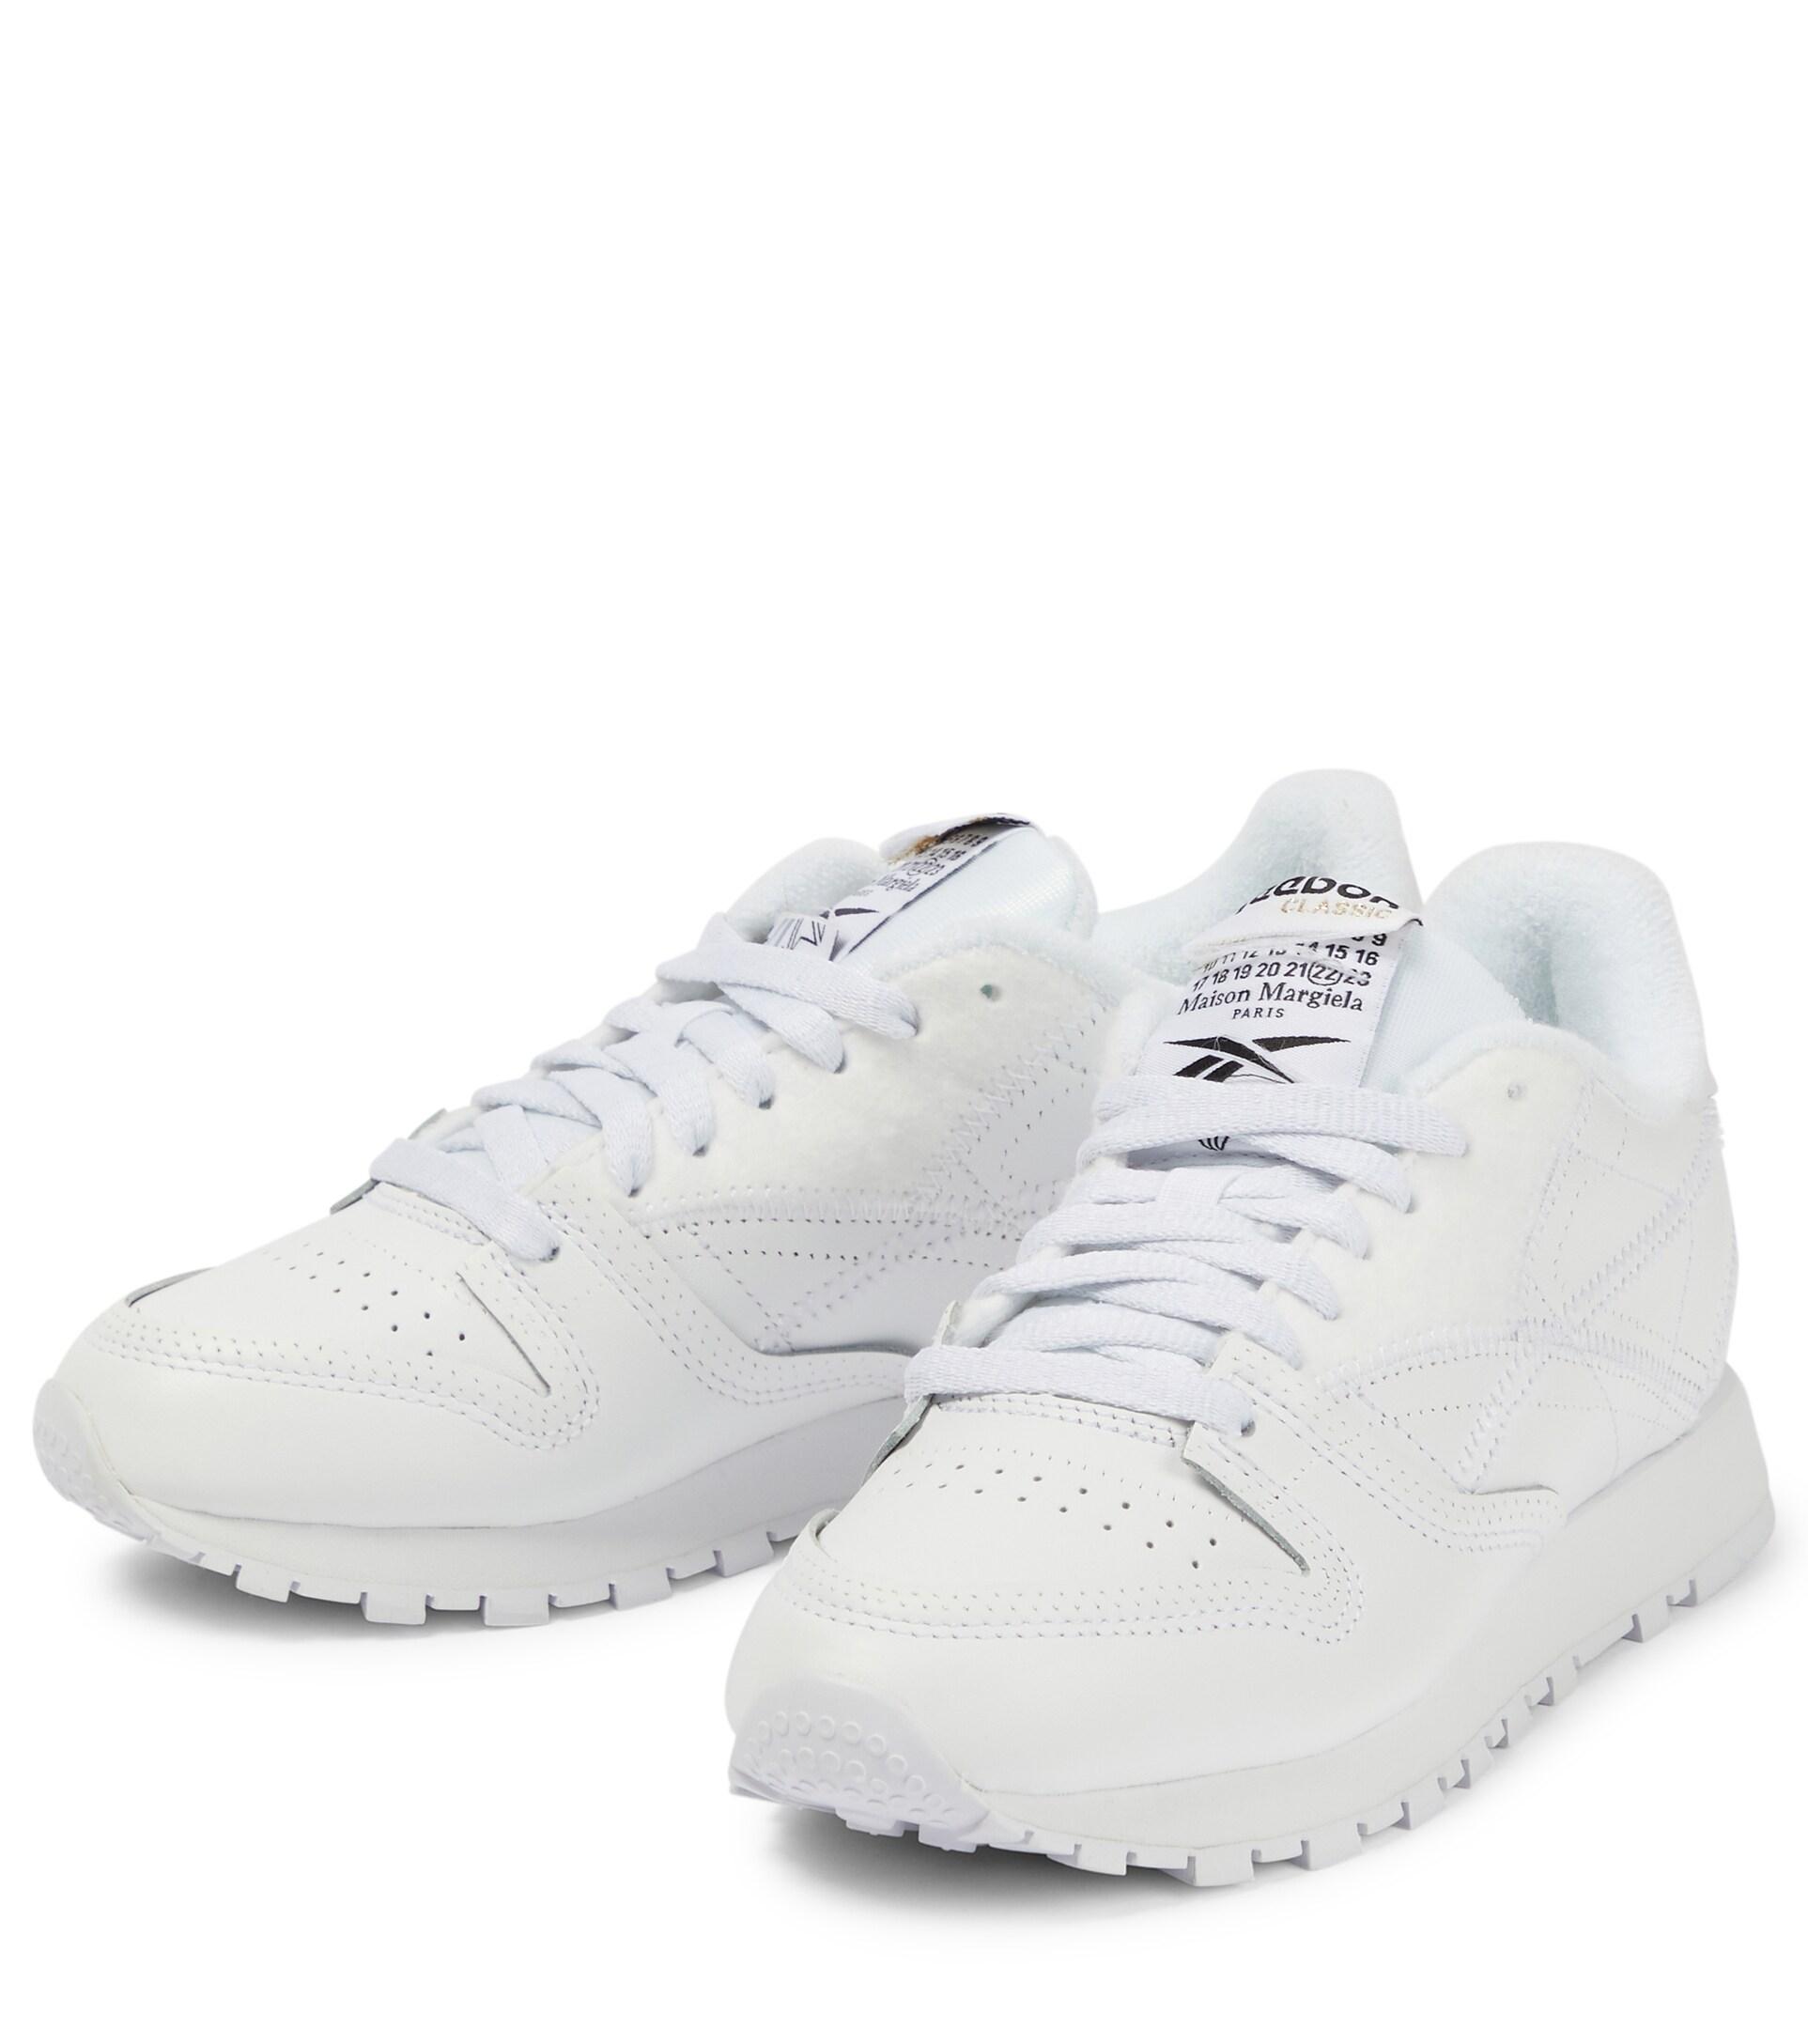 Maison Margiela X Reebok Cl Memory Of Leather Sneakers in White | Lyst